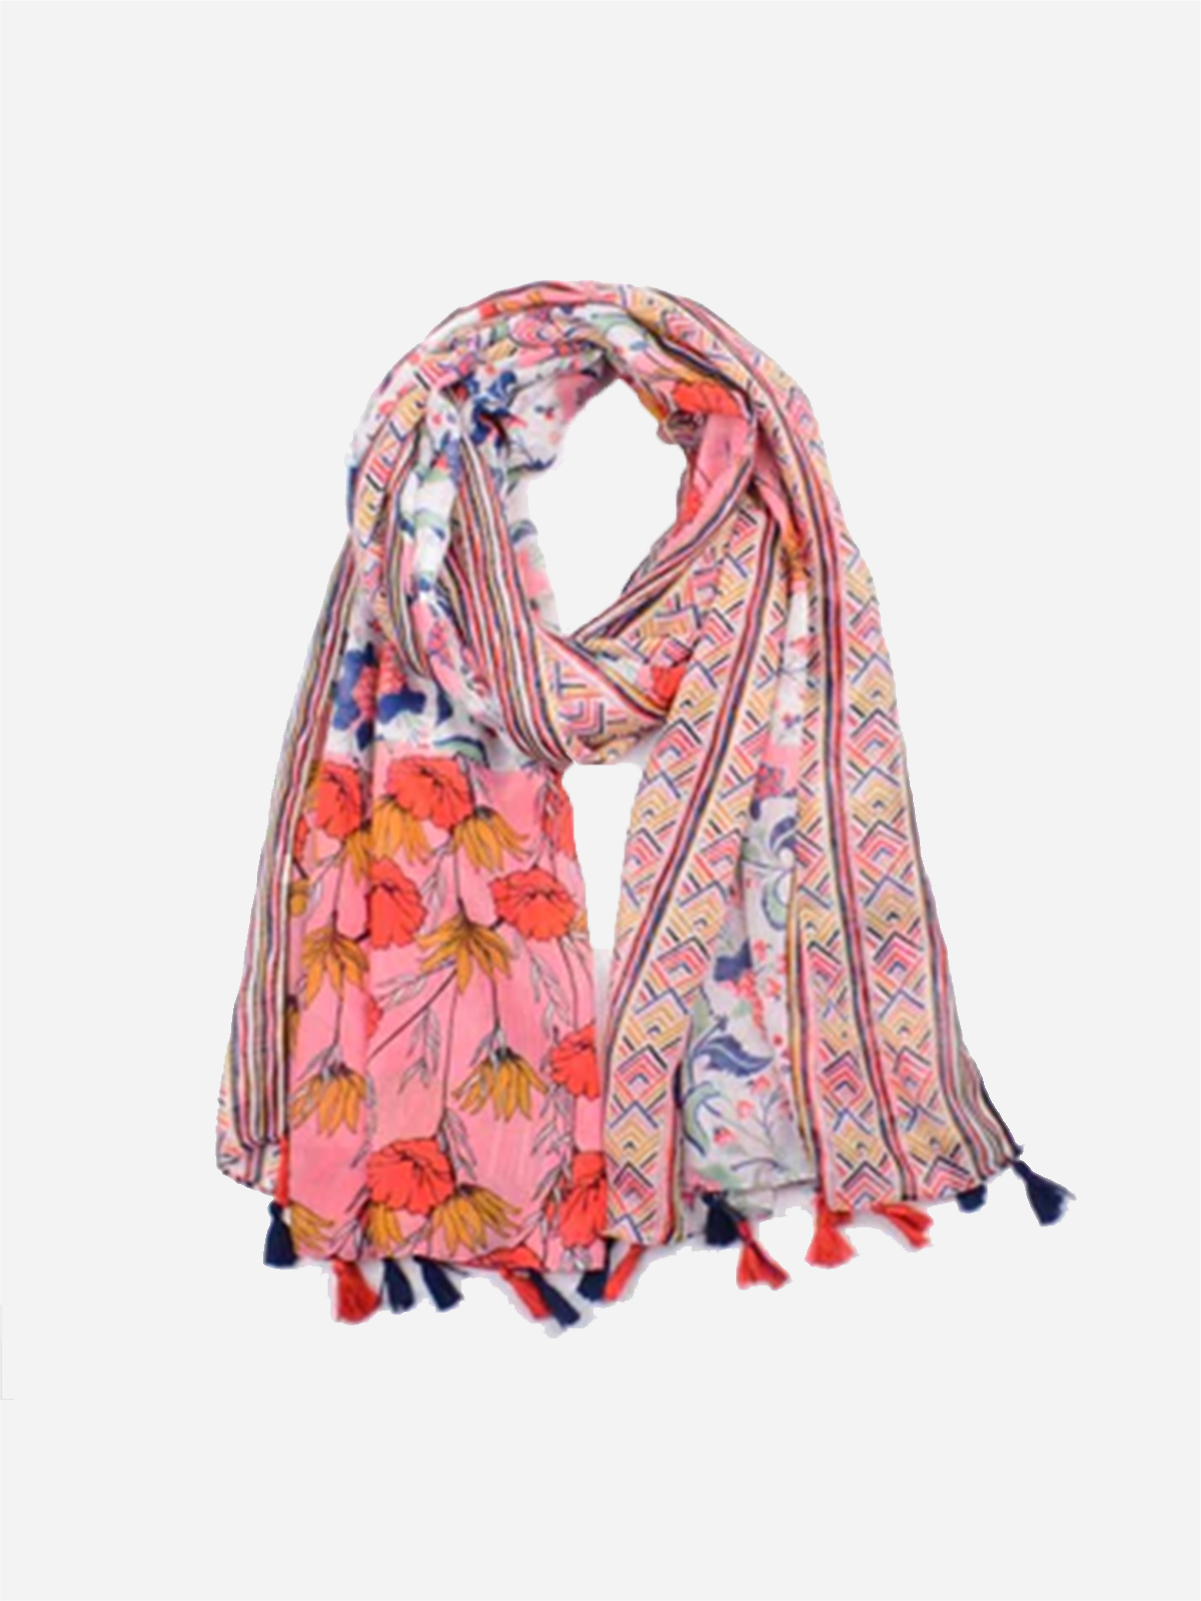 Pink floral scarf with tassels in the ends